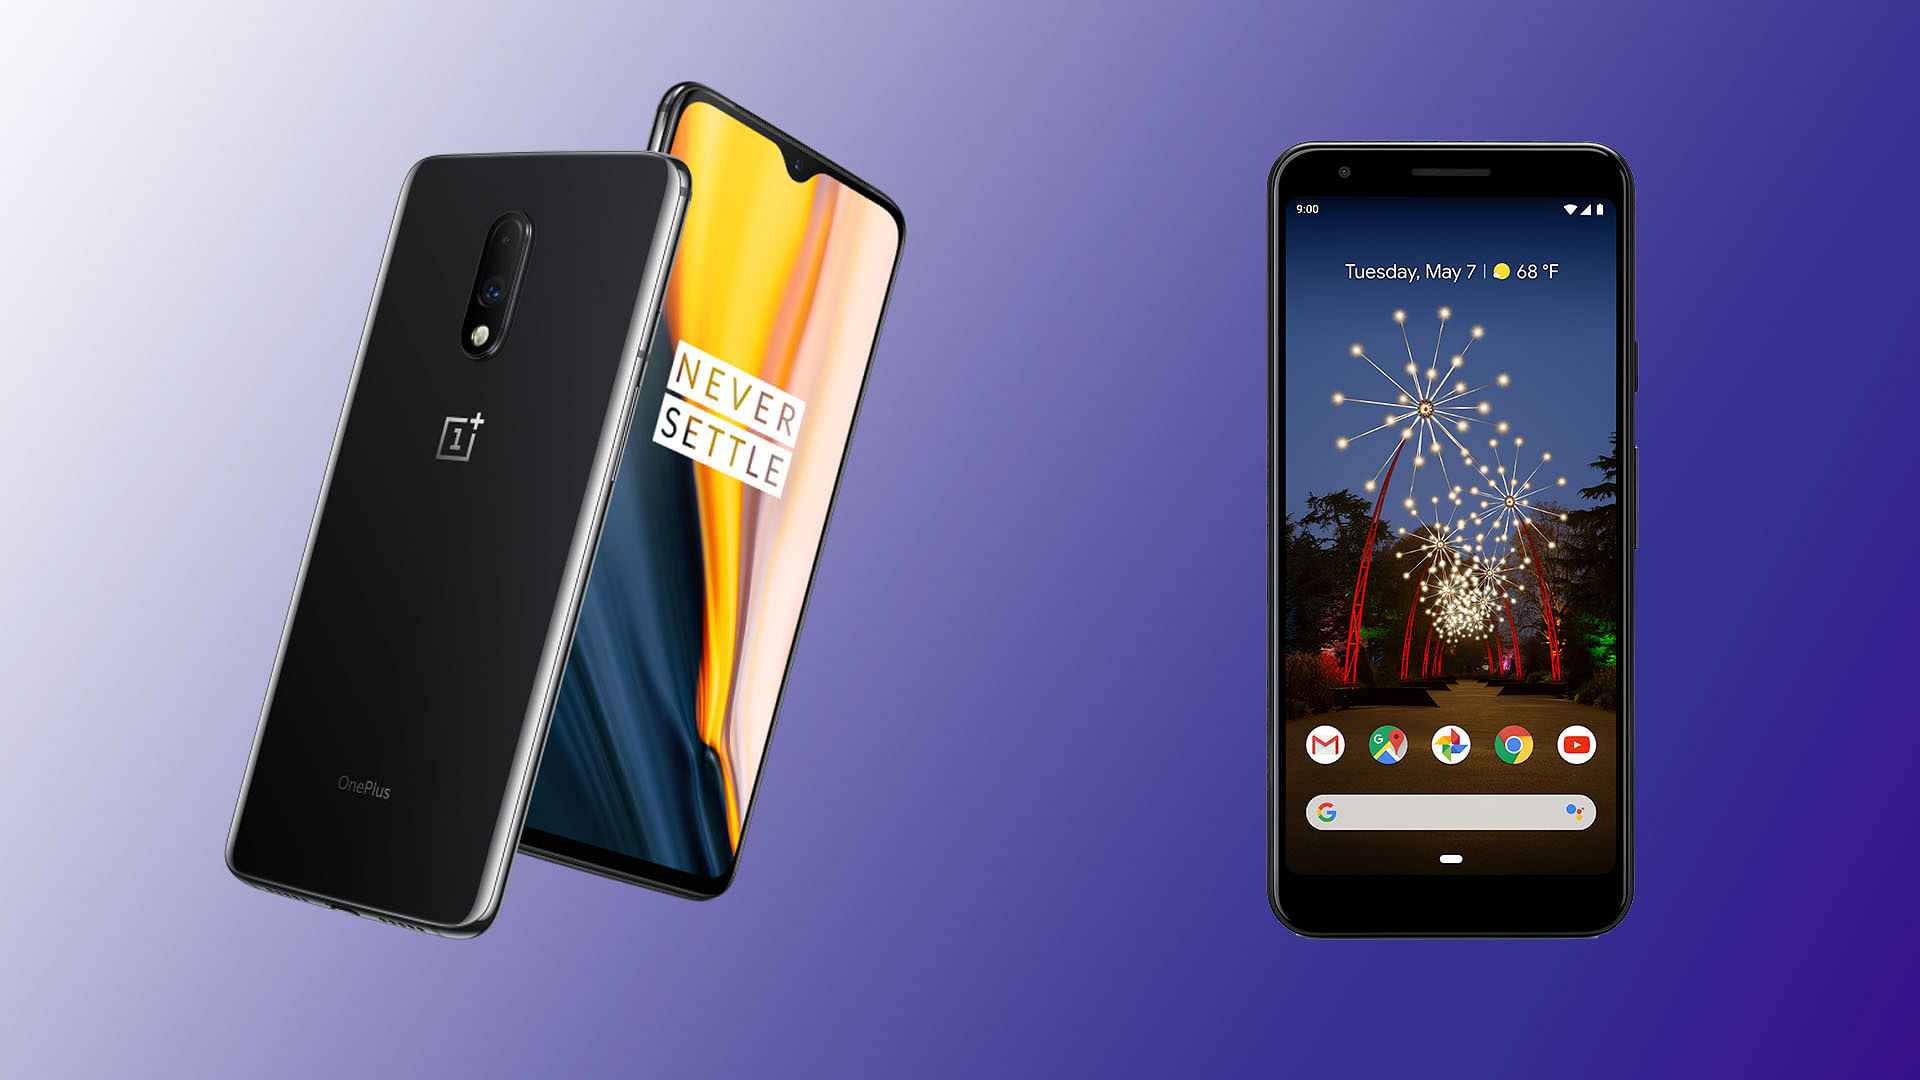 Should you pick the OnePlus 7 (left) or the Google Pixel 3a (right)